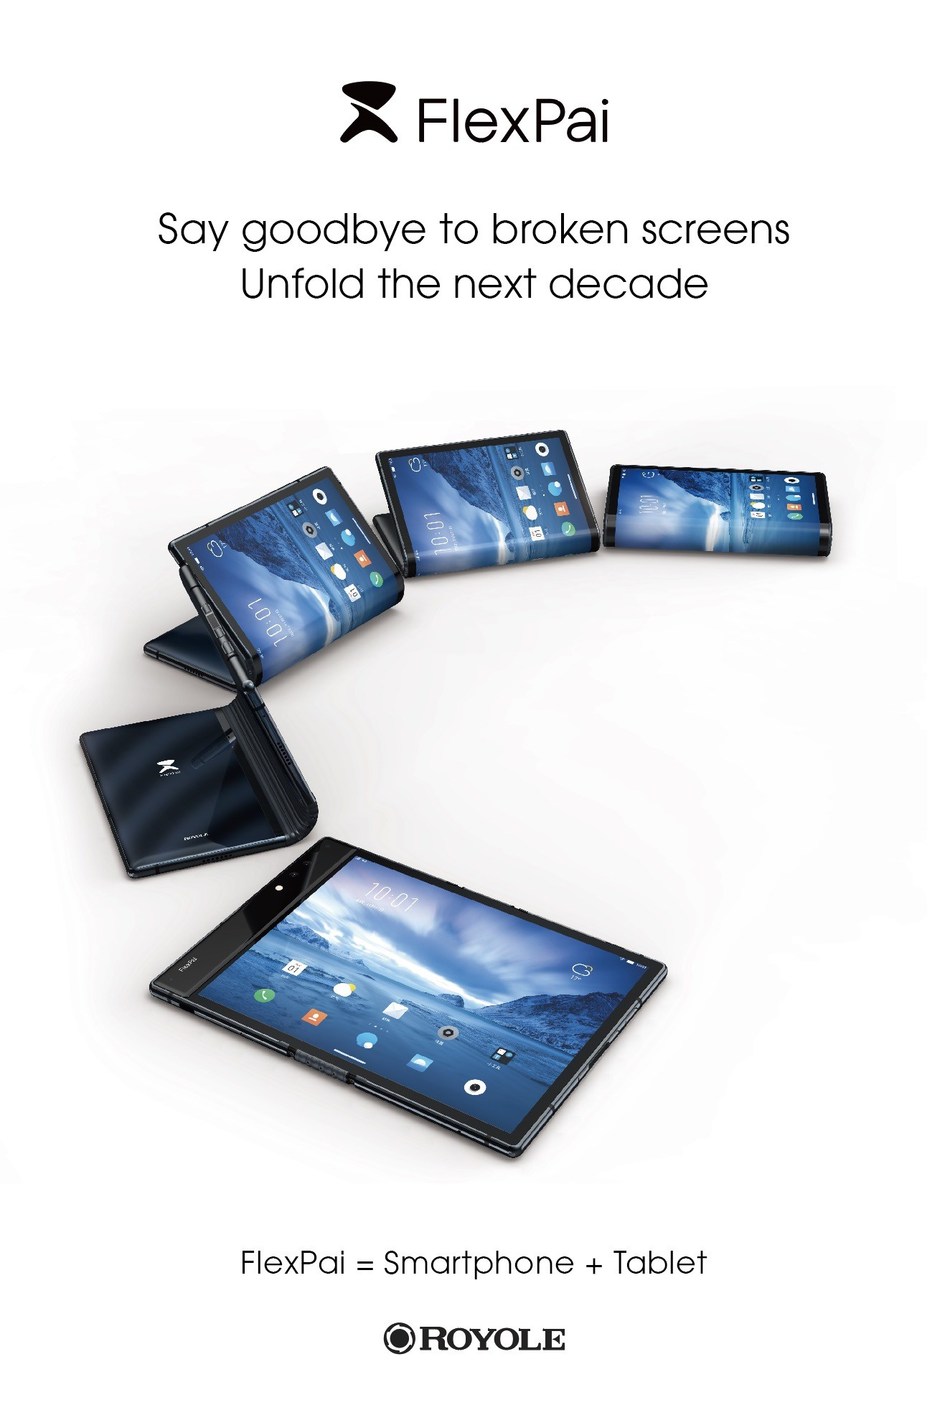 Disrupting consumers’ traditional concept of a smartphone, FlexPai can be used either folded or unfolded, giving it the portability of a smartphone plus the screen size of a high-definition tablet.